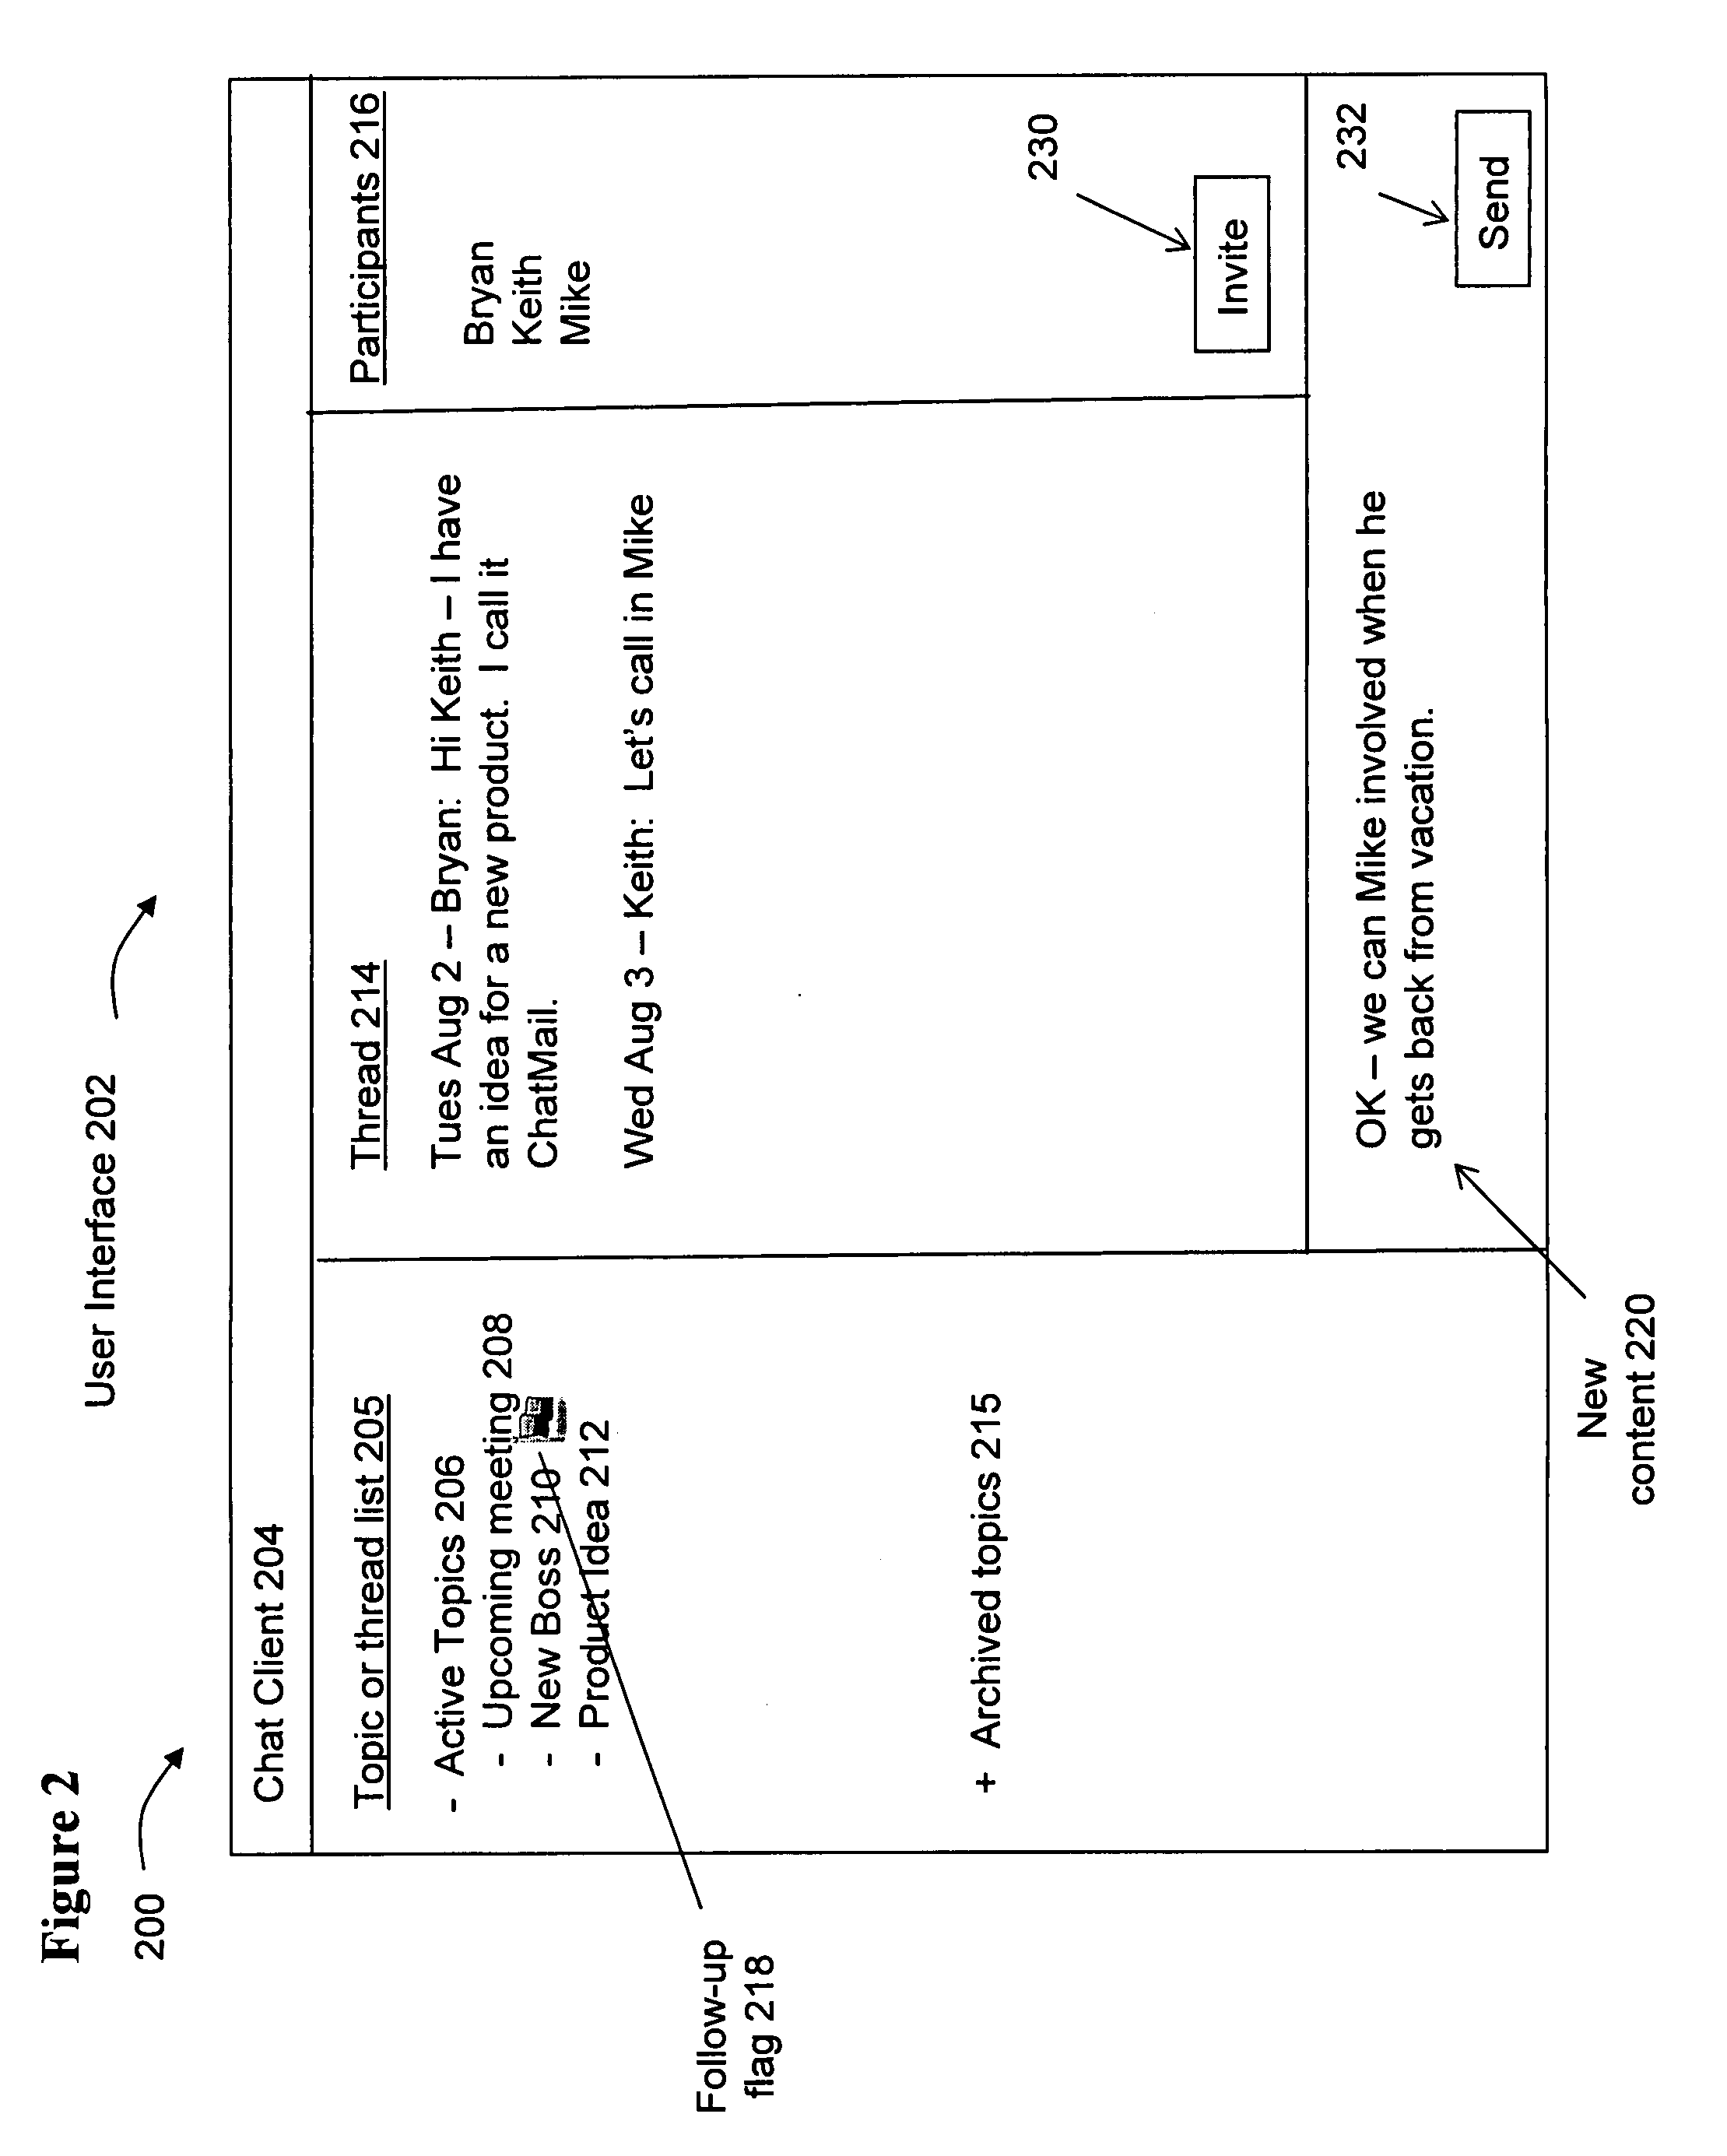 System and method for combining instant messaging with email in one client interface